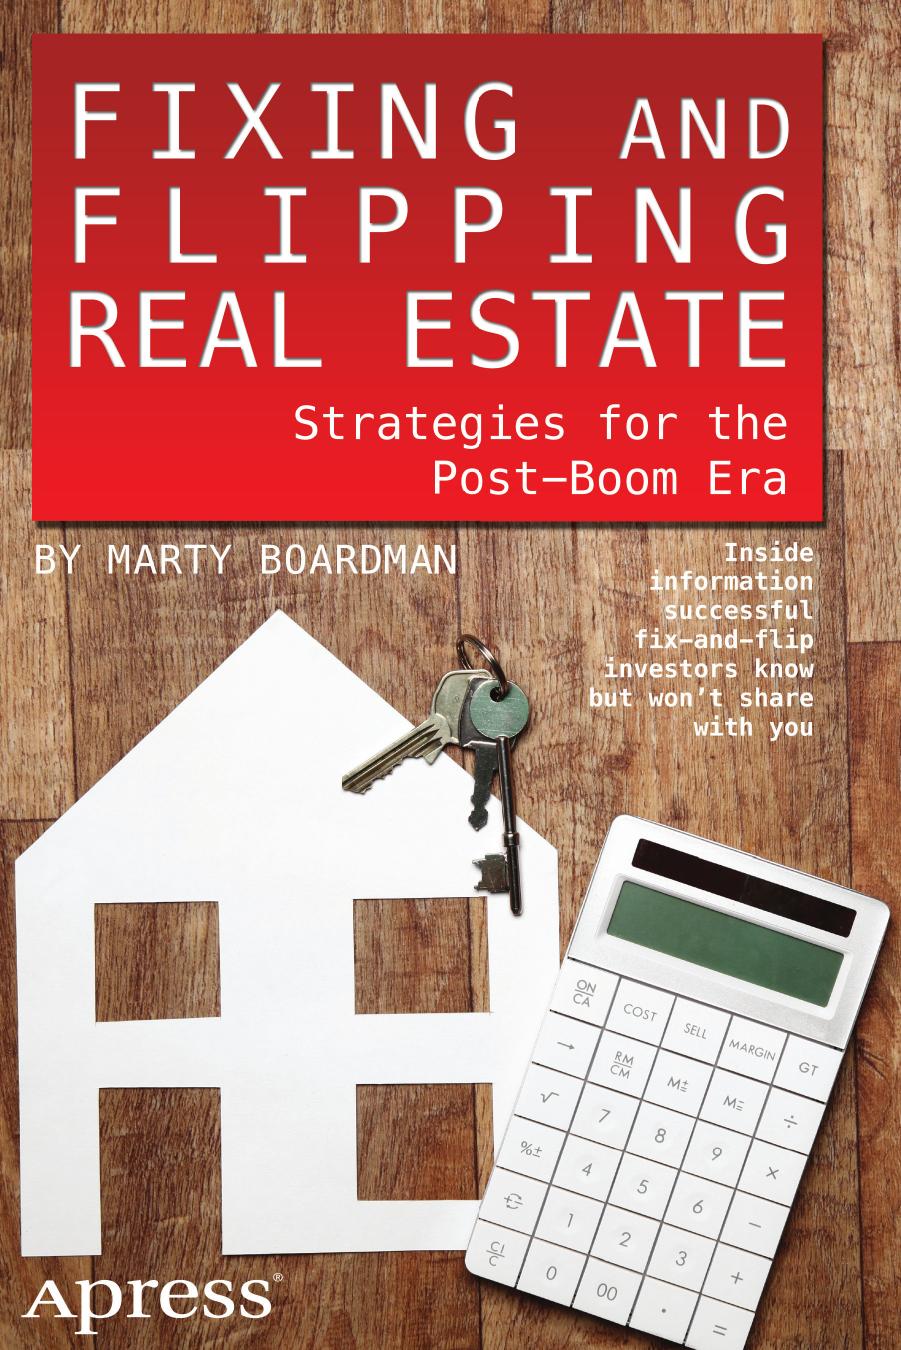 Fixing and Flipping Real Estate: Strategies for the Post-Boom Era by Marty Boardman